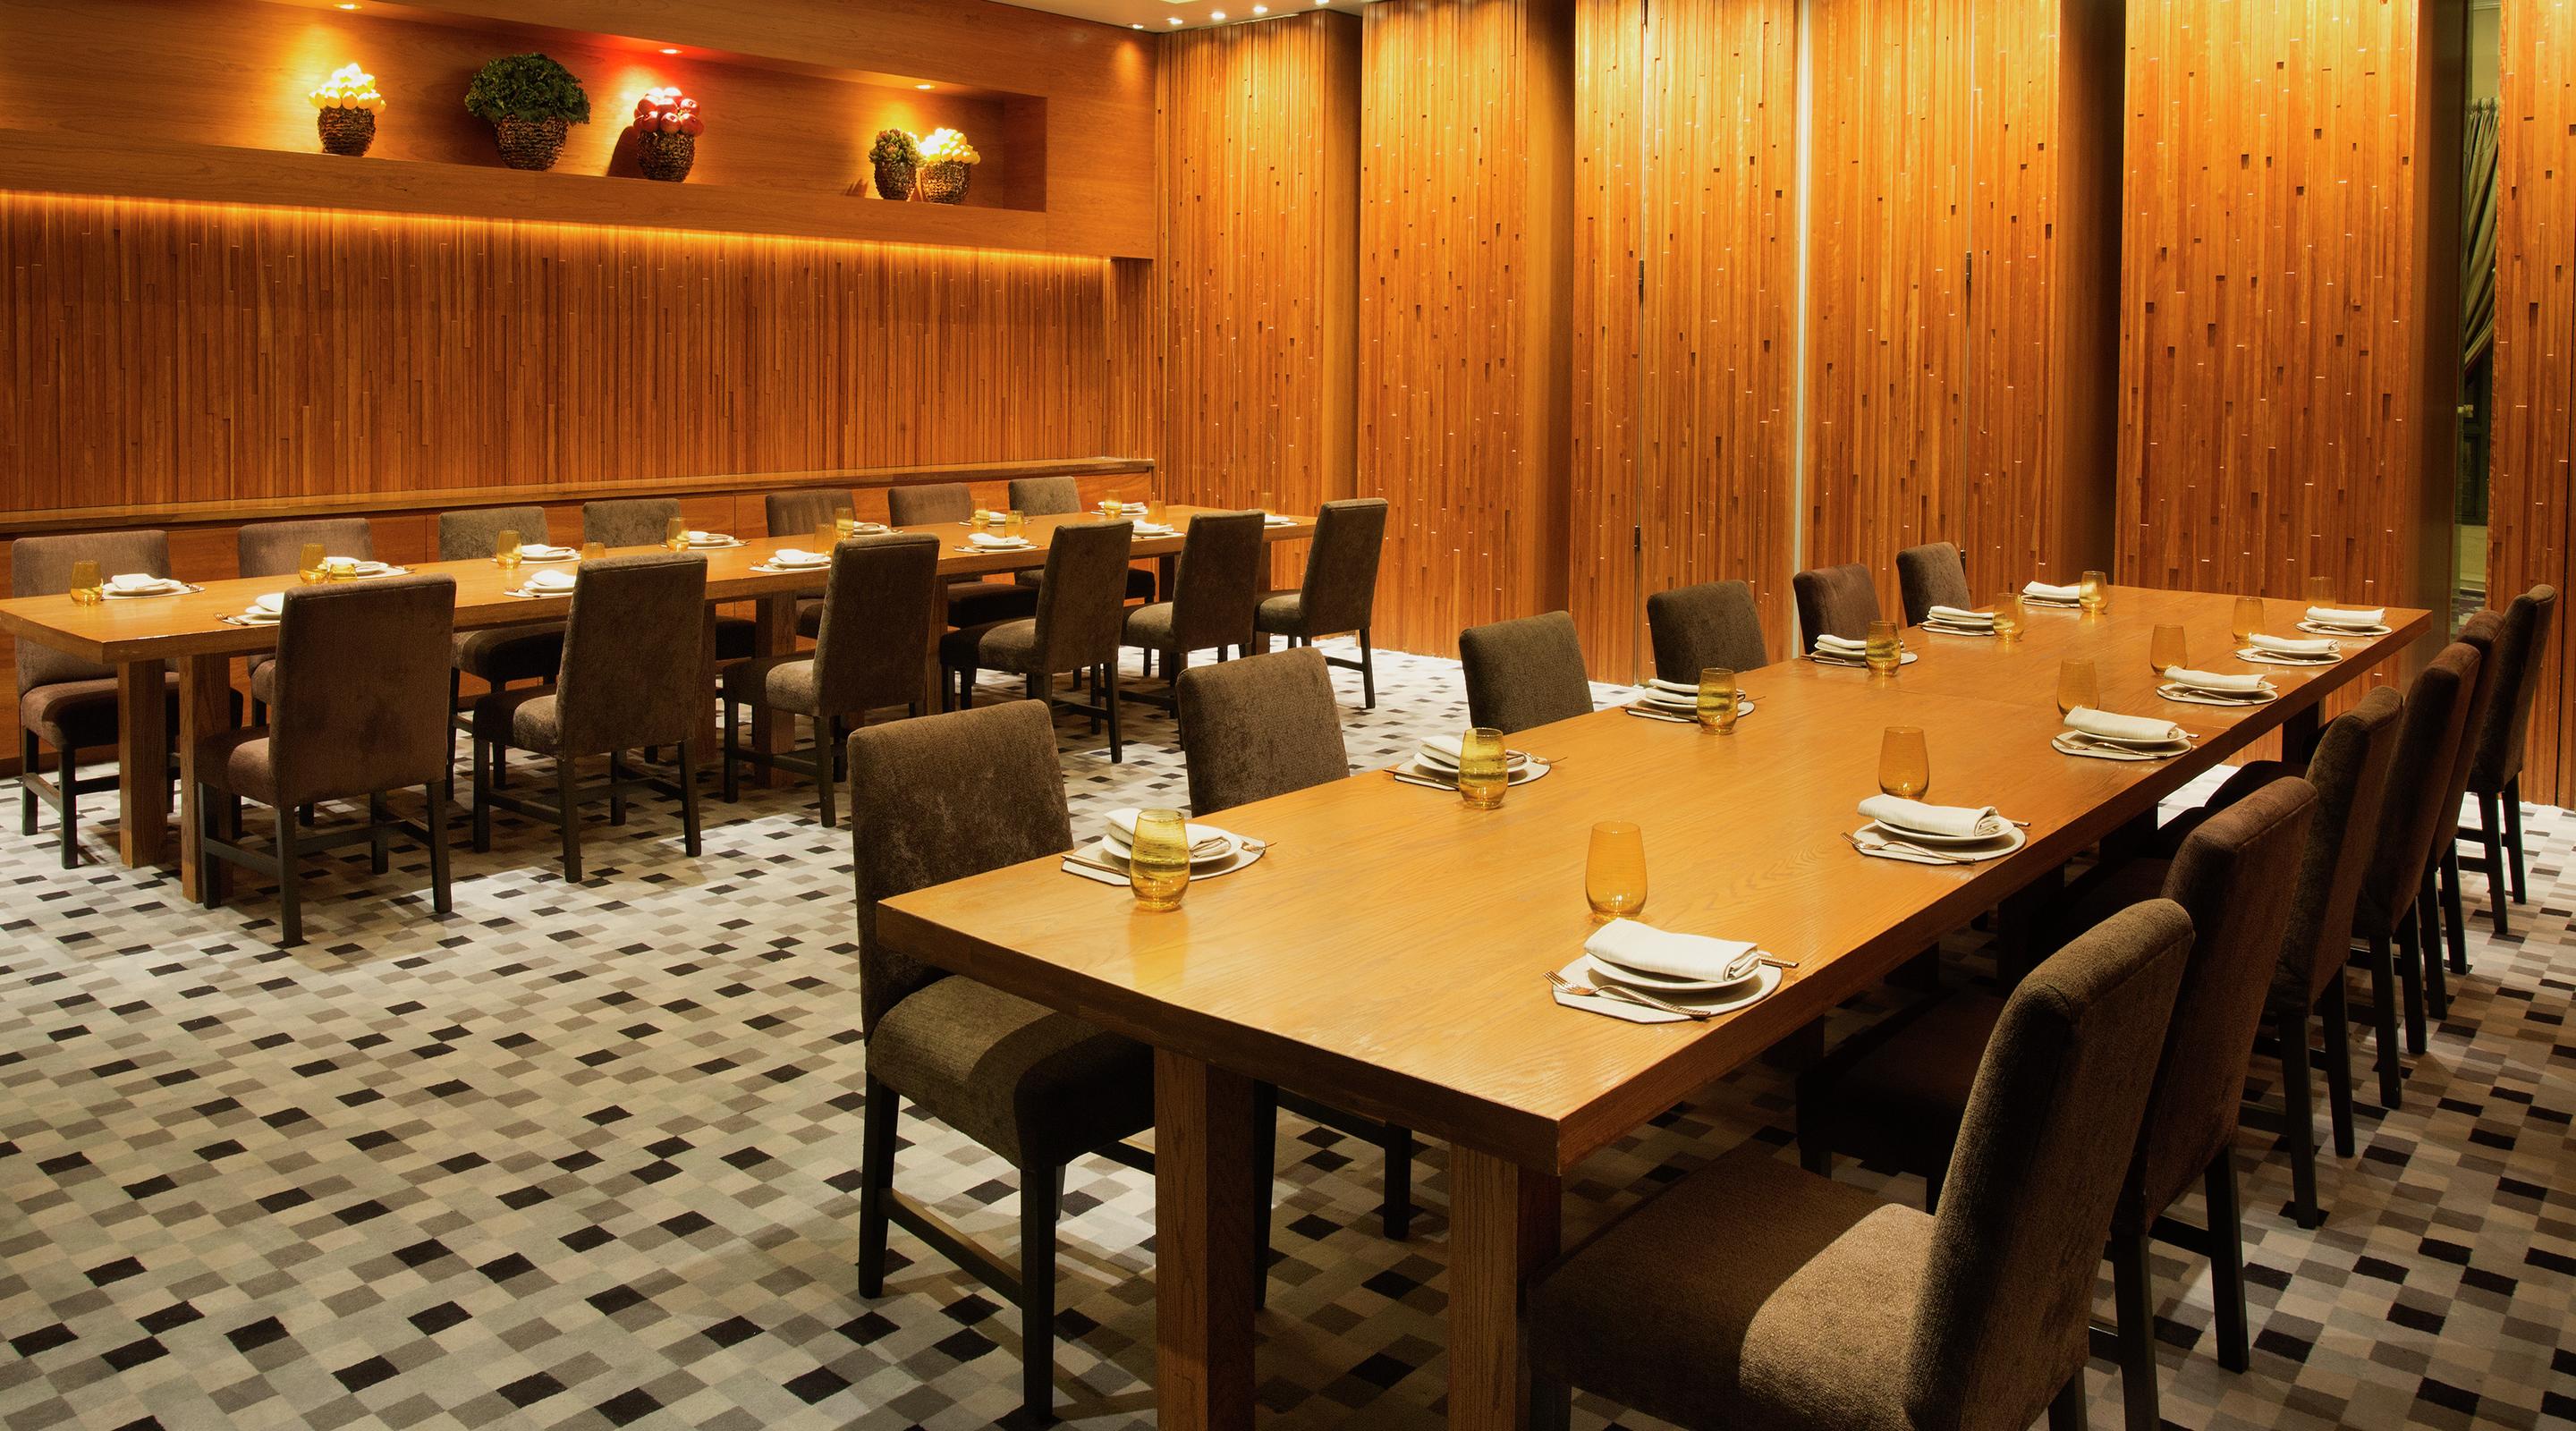 Reserve your private dining room at Harvest now.